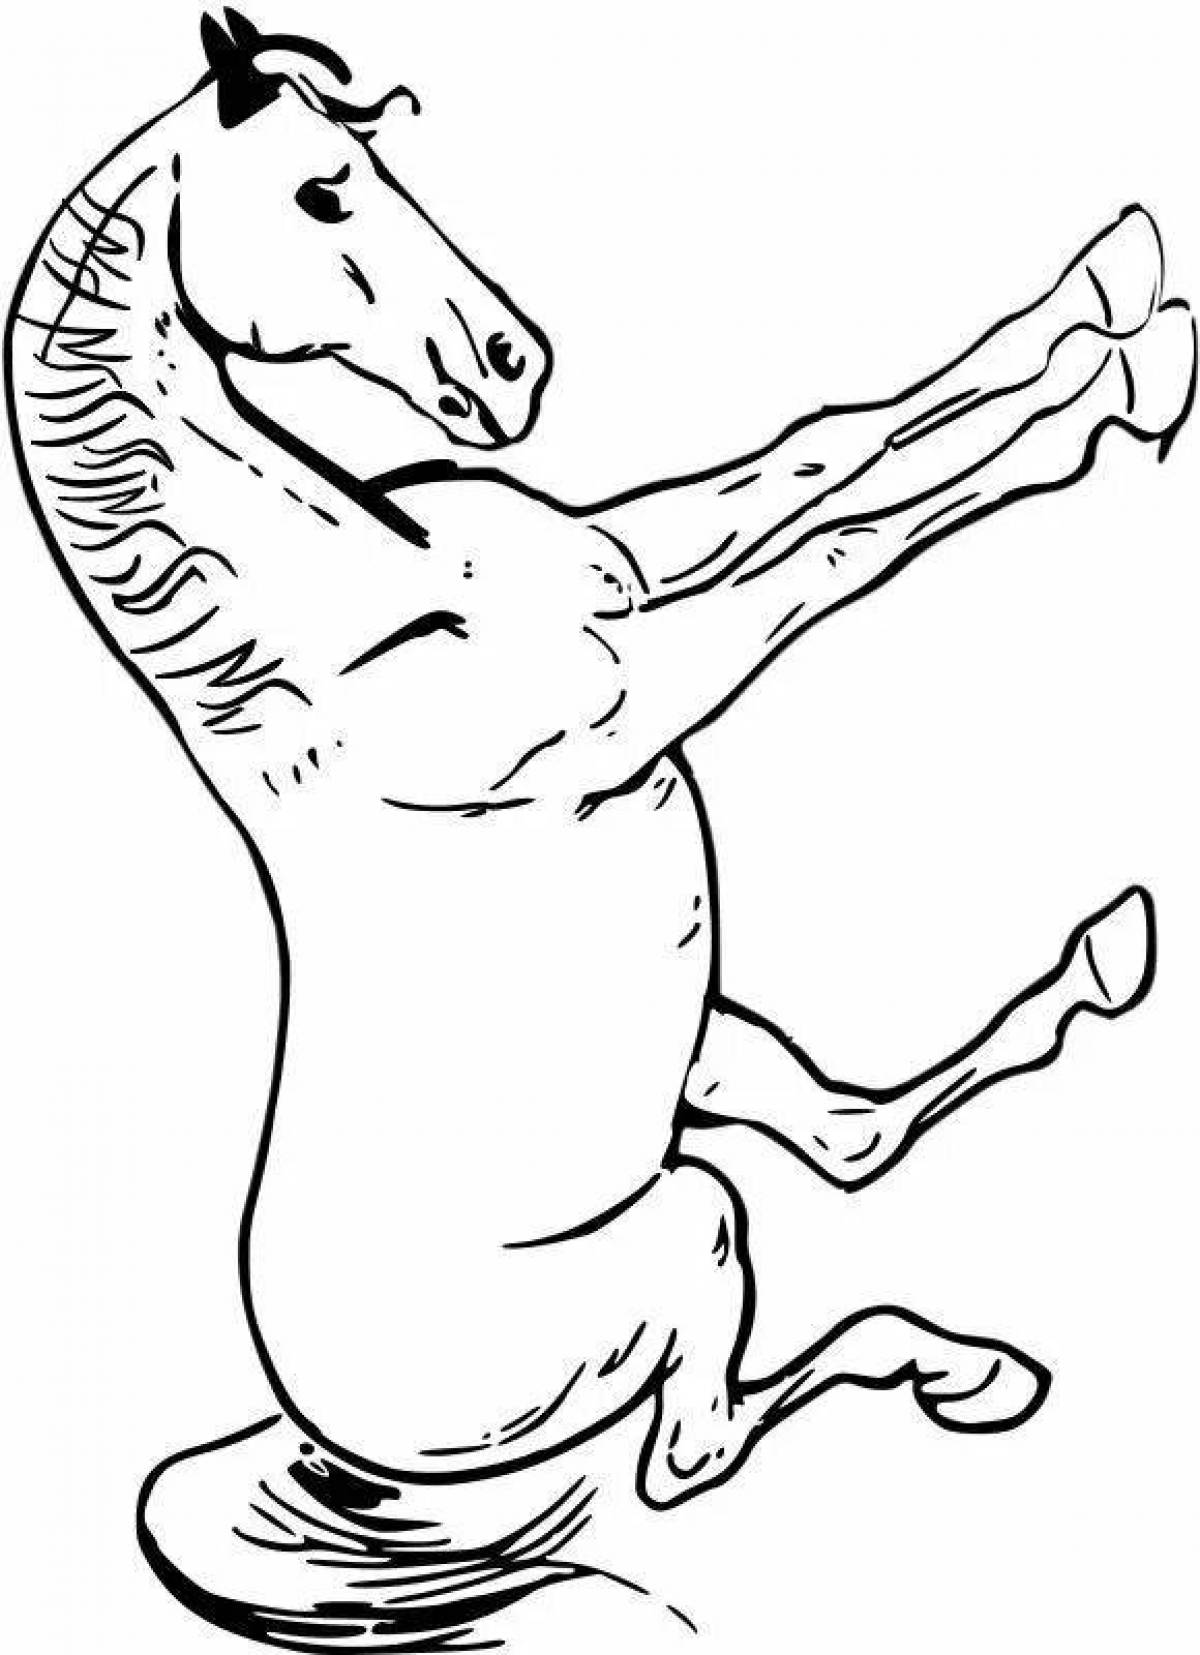 Majestic lanky horse coloring page